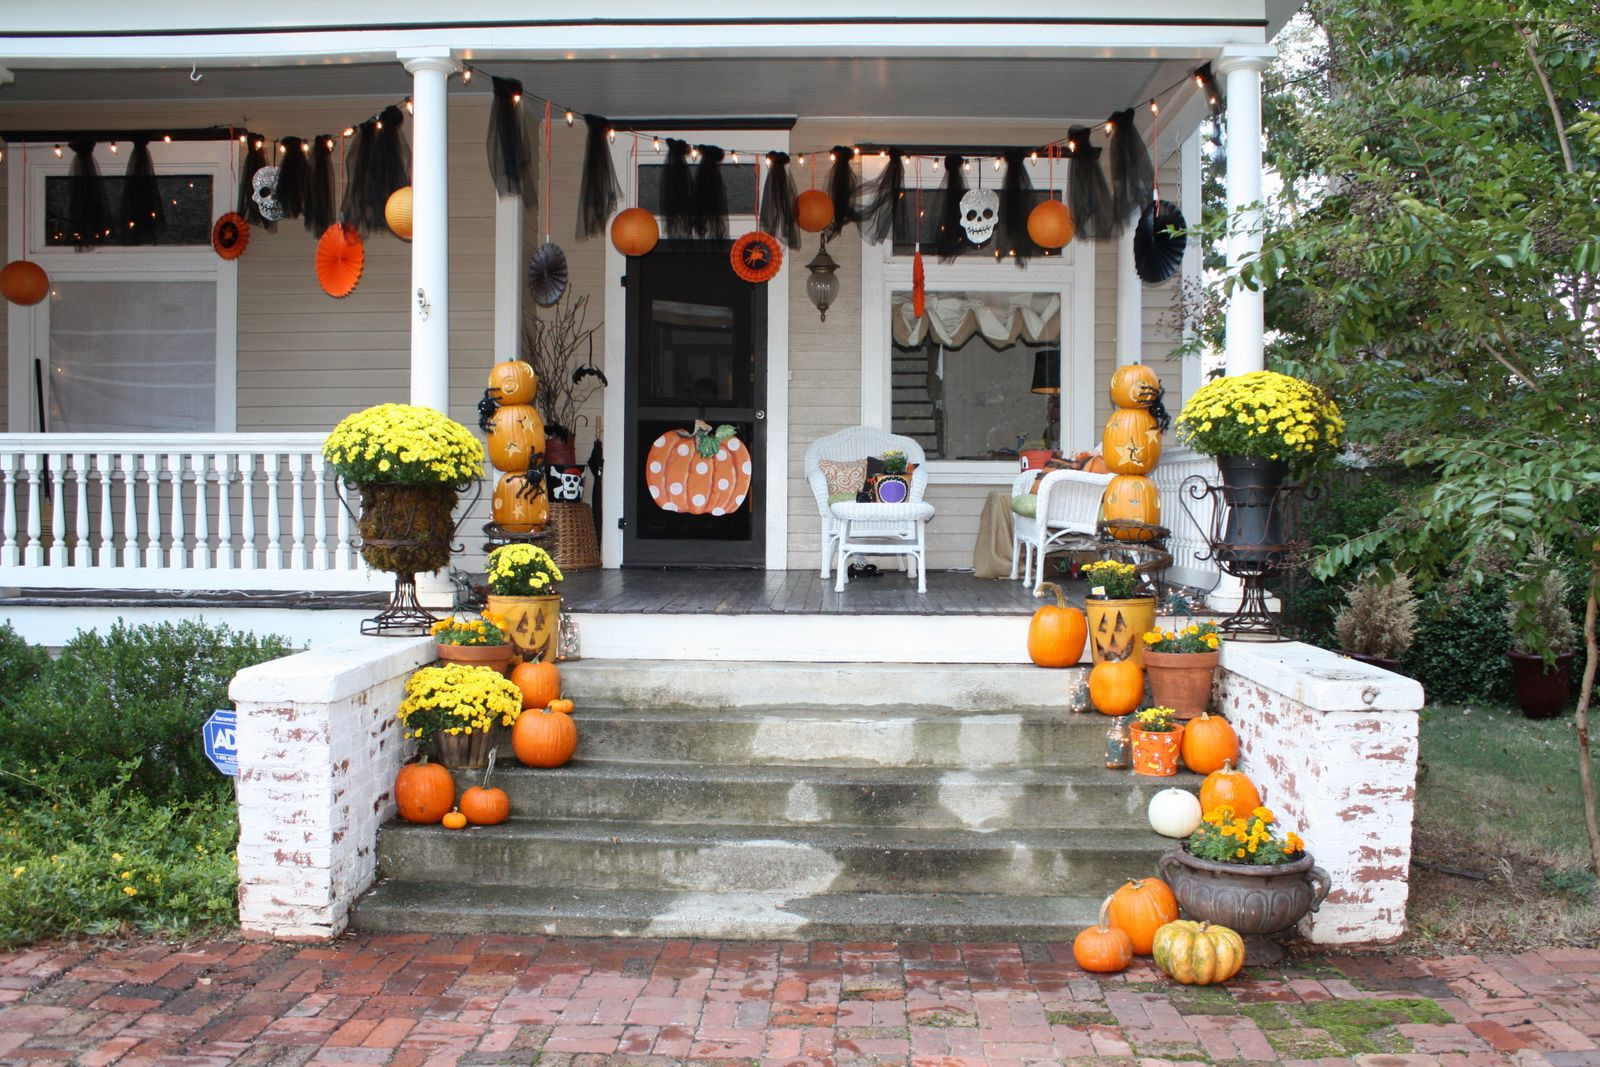 Halloween Porch Decorations
 Our Southern Nest Whimsical Halloween Decorations